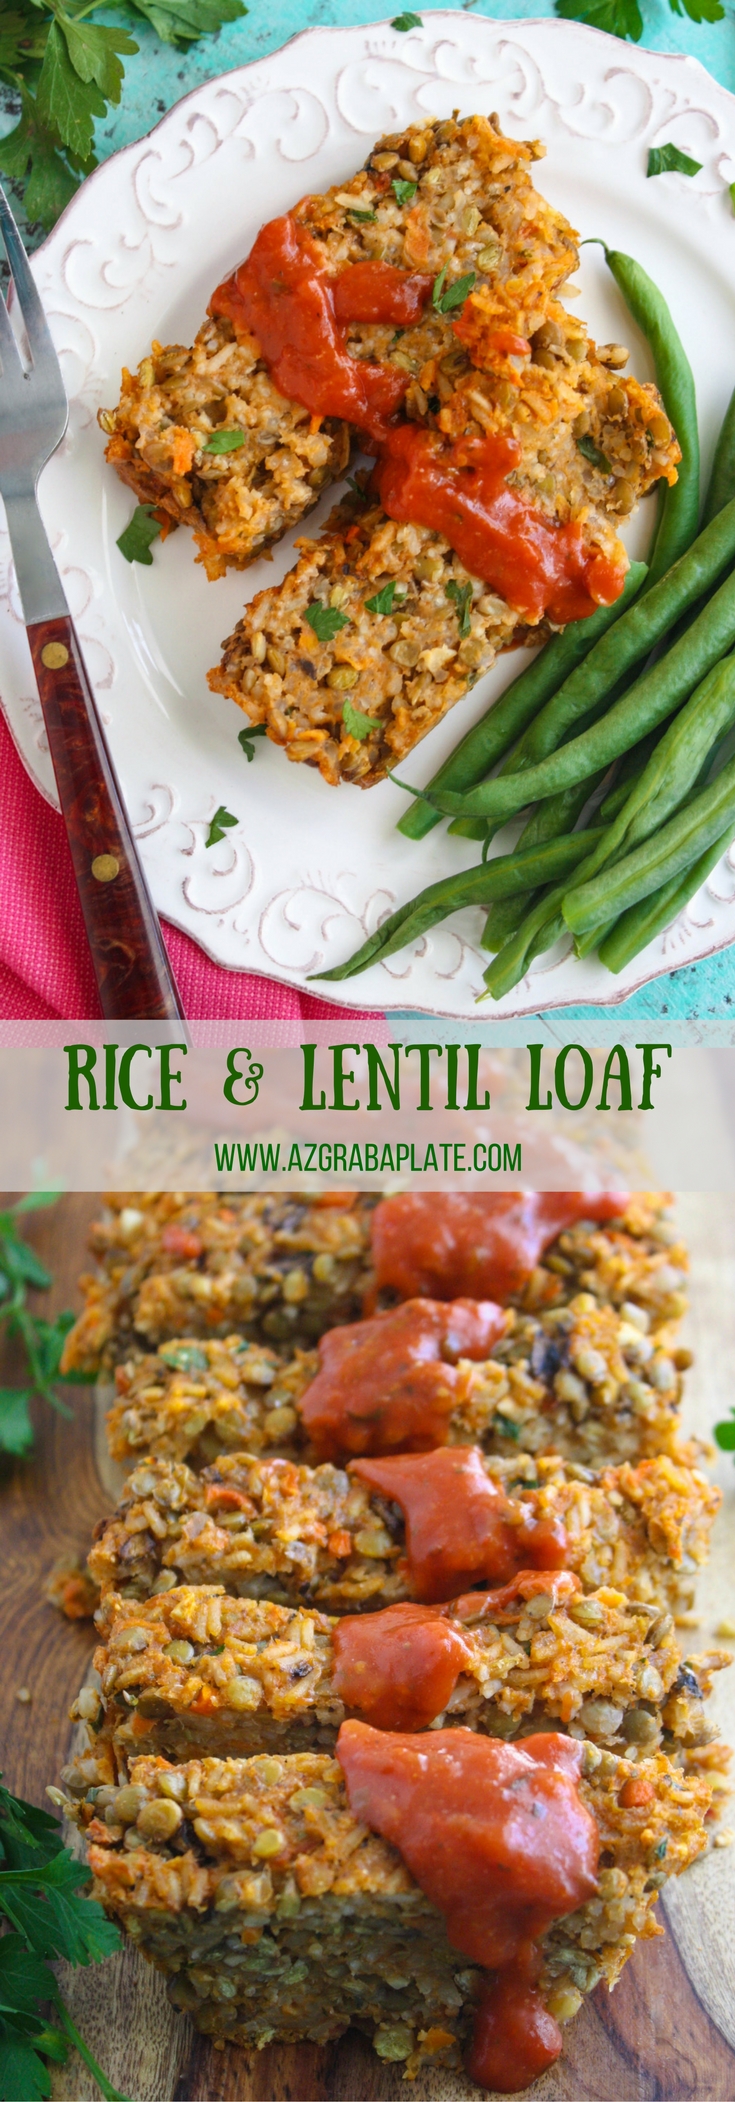 Rice and Lentil Loaf is a classic dish with a vegetarian twist. You'll love how good this classic can be!